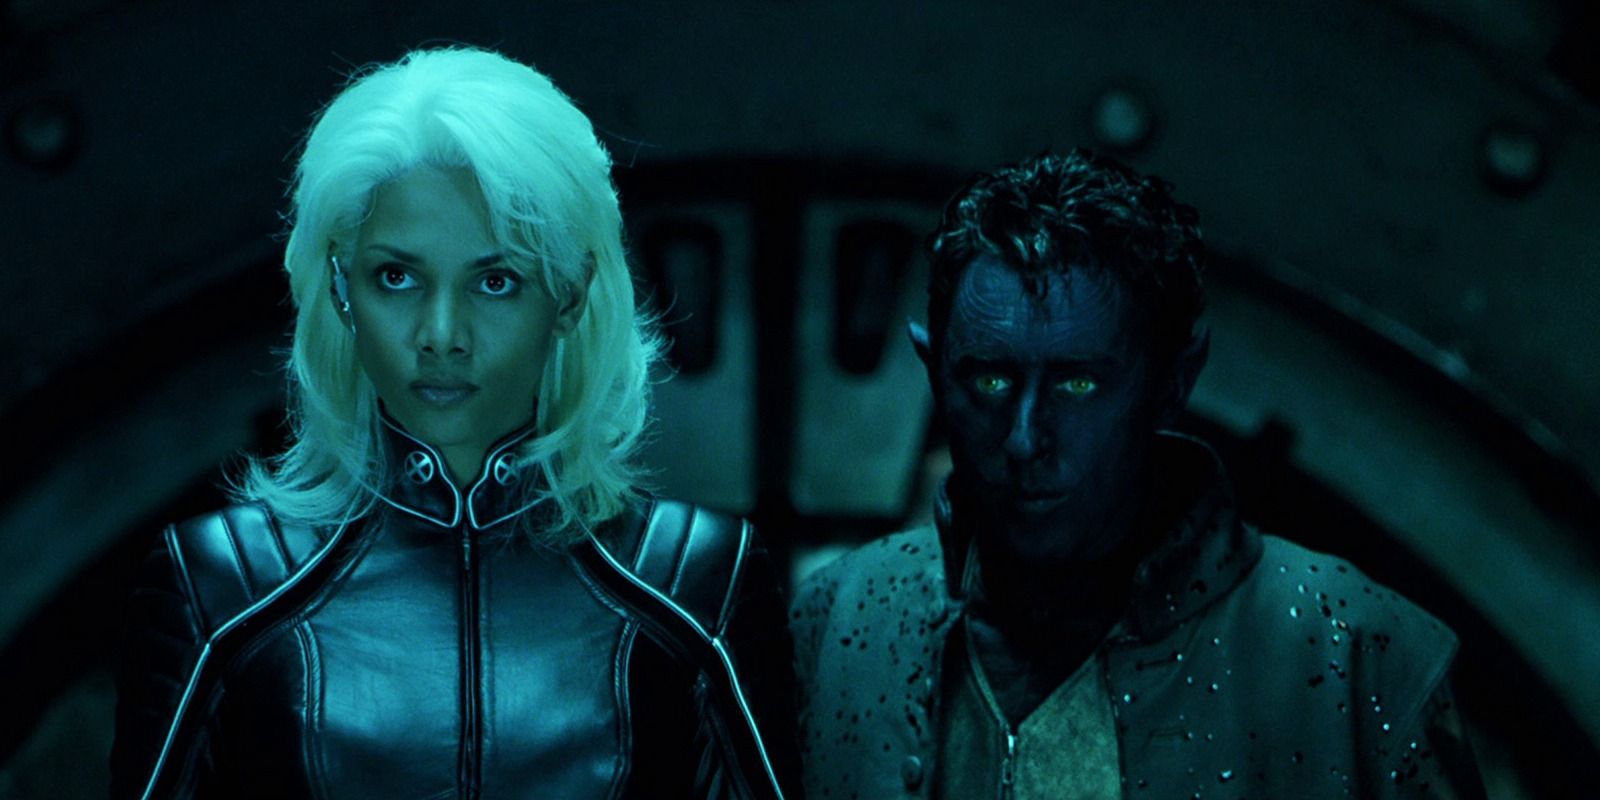 15 Most Sexist Moments In Superhero Movies